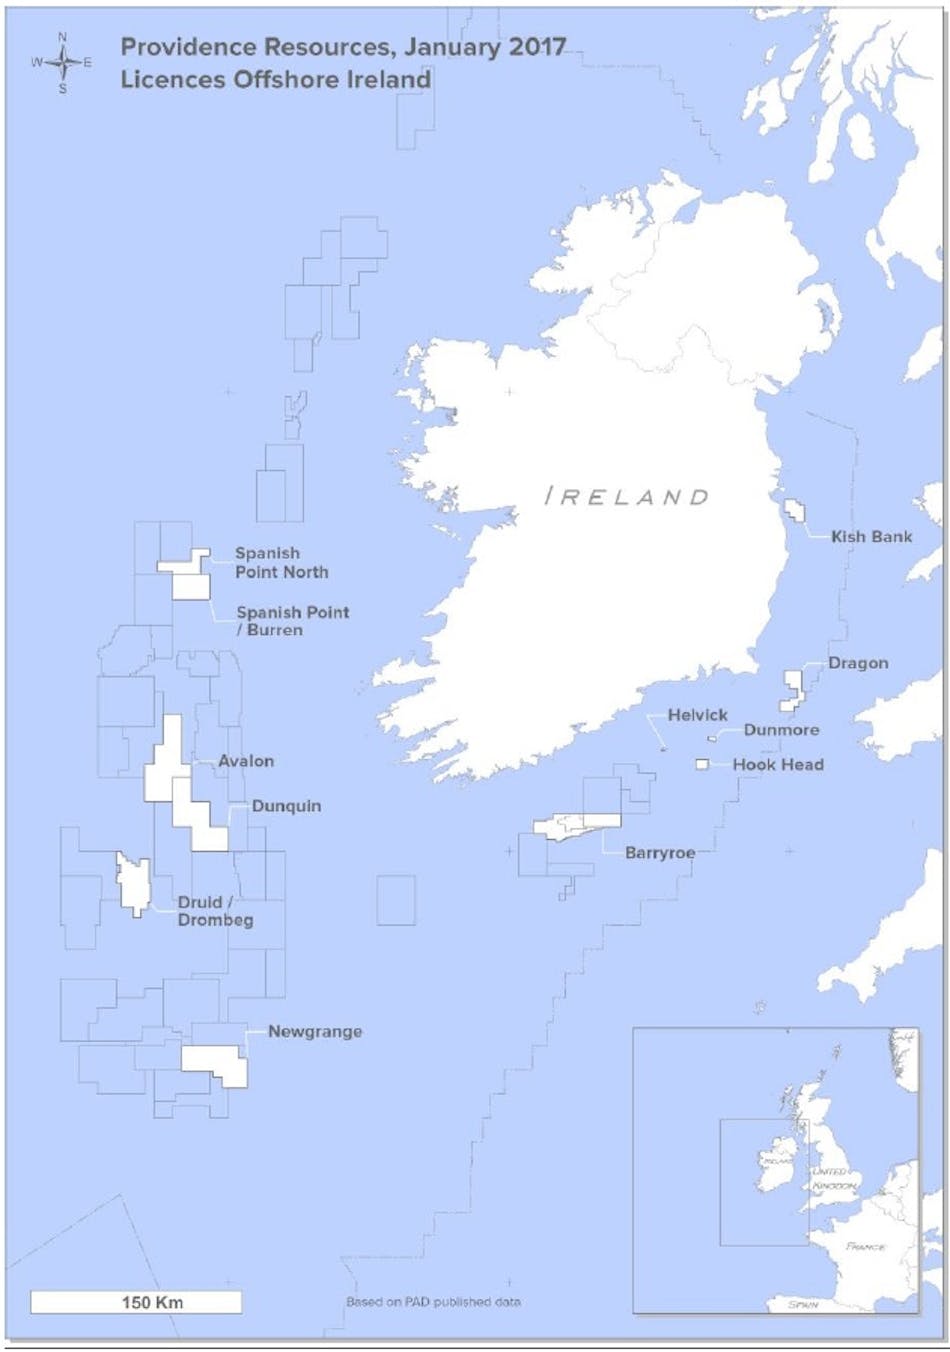 Providence Resources offshore Ireland